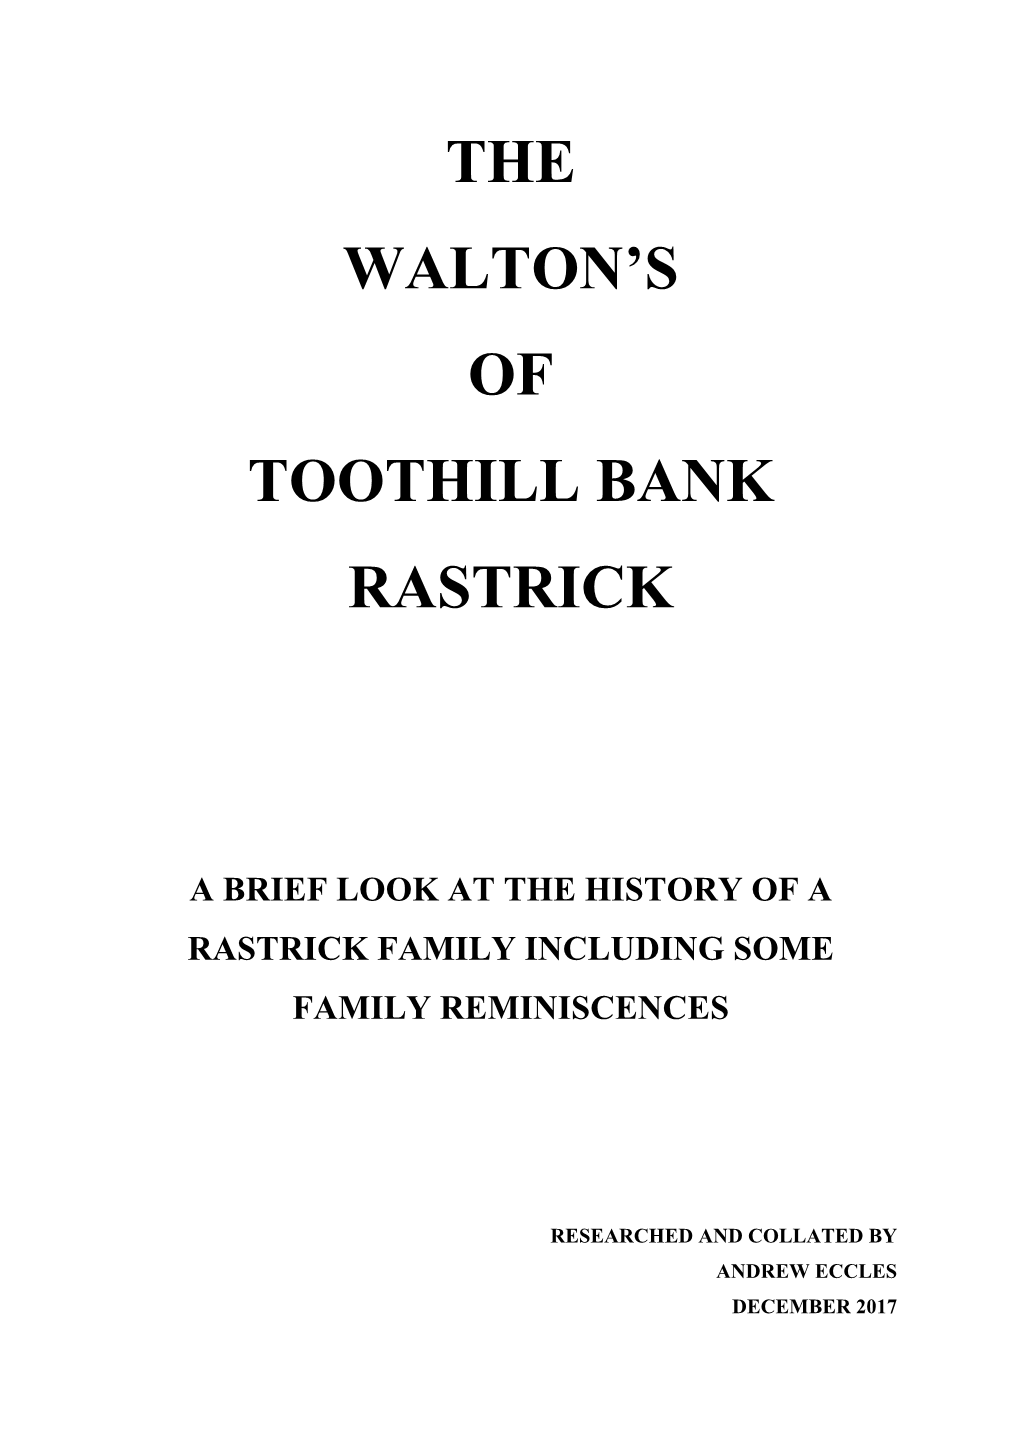 The Walton's of Toothill Bank Rastrick